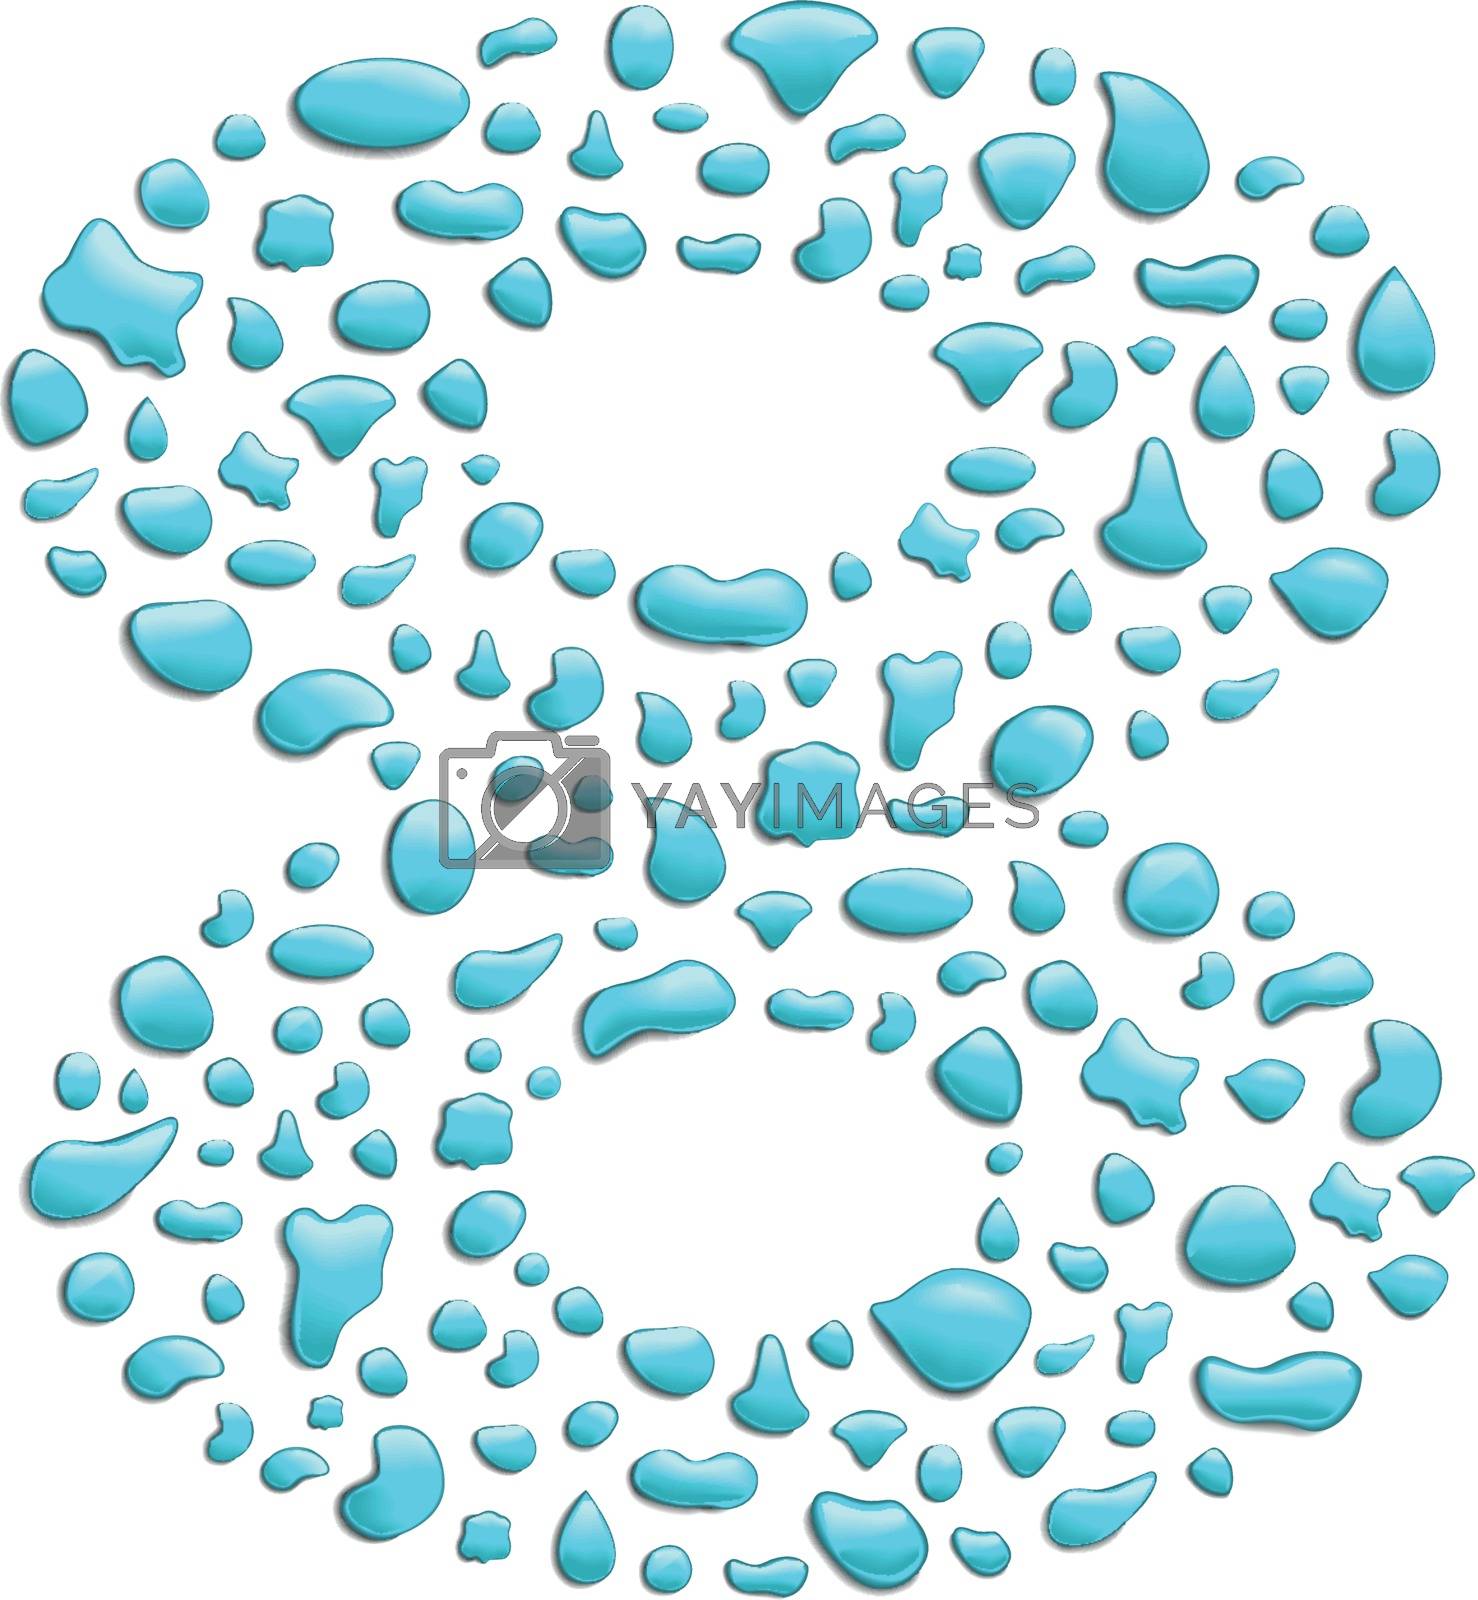 Royalty free image of water number 8 by noche